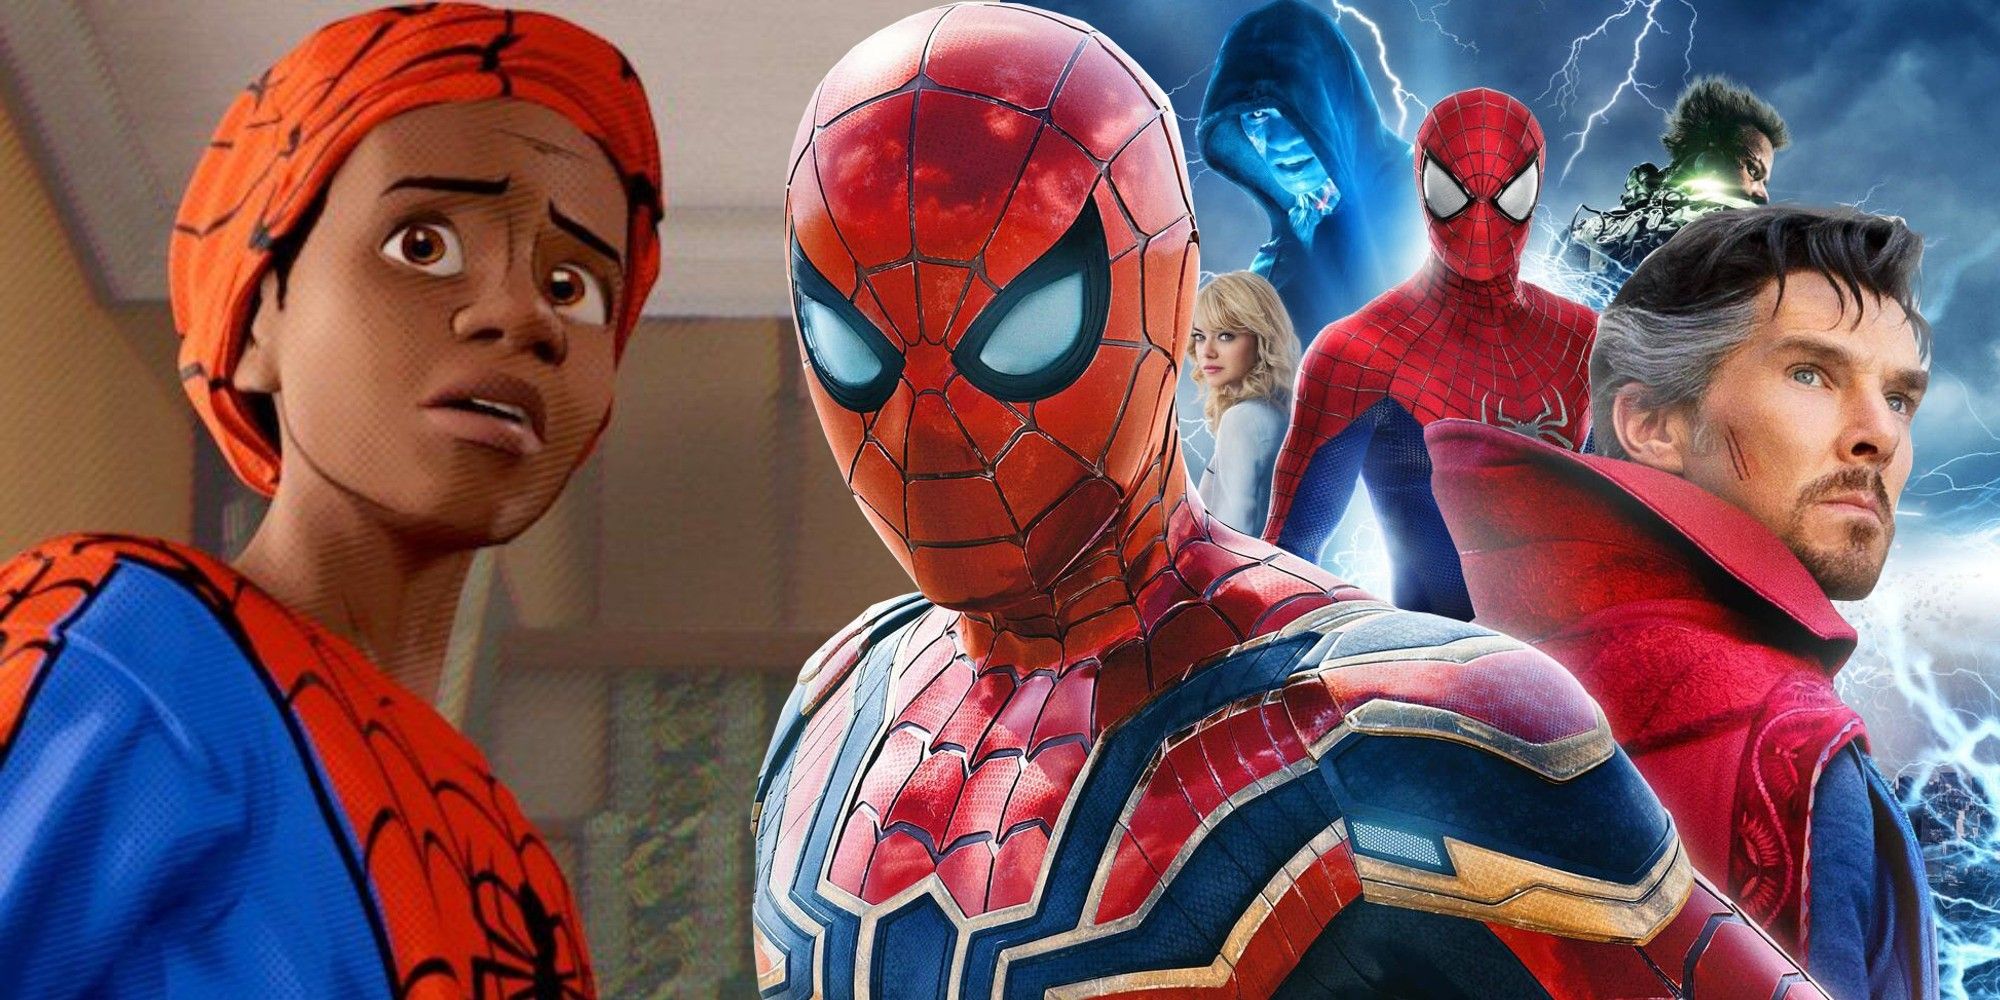 Split image Spider-Man movies Into the Spider-Verse, No Way Home and Amazing Spider-Man 2